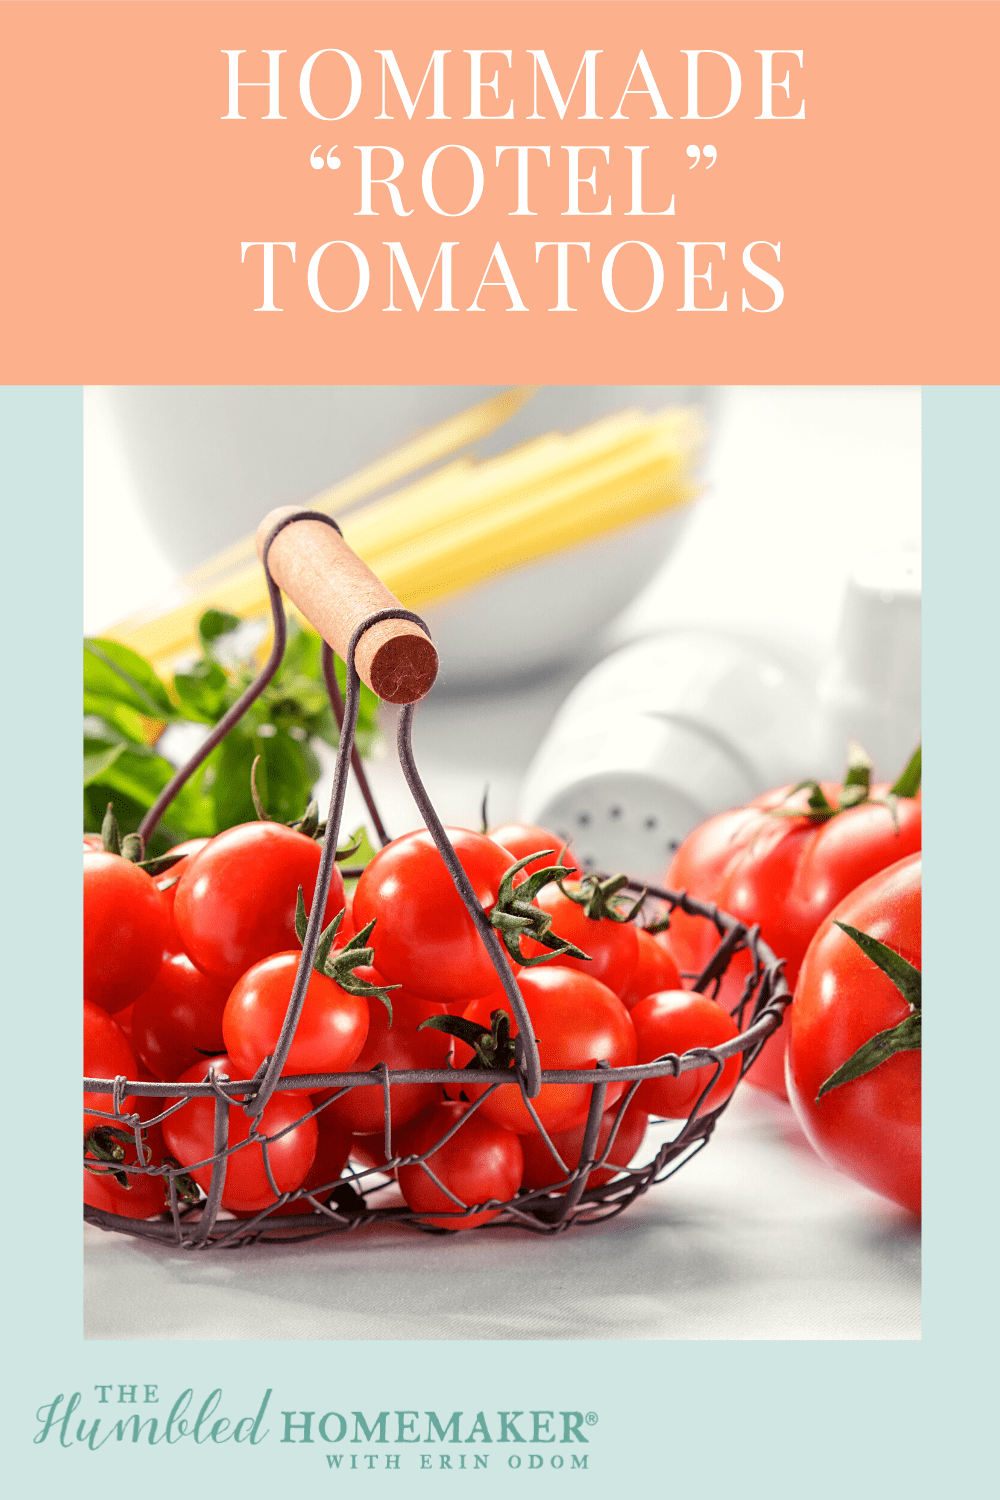 Last summer, our modest garden exploded with peppers and tomatoes! And what better use for such healthful veggies than to make homemade "rotel" (tomatoes and peppers)?